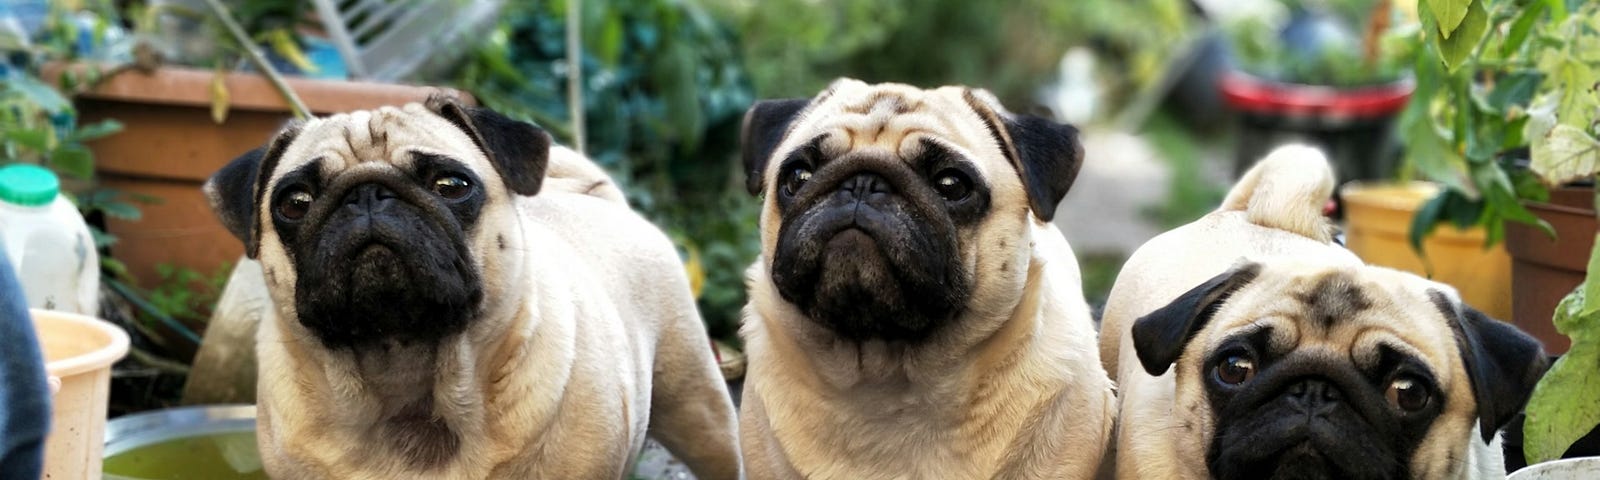 Three pug dogs, looking up, probably at their master.